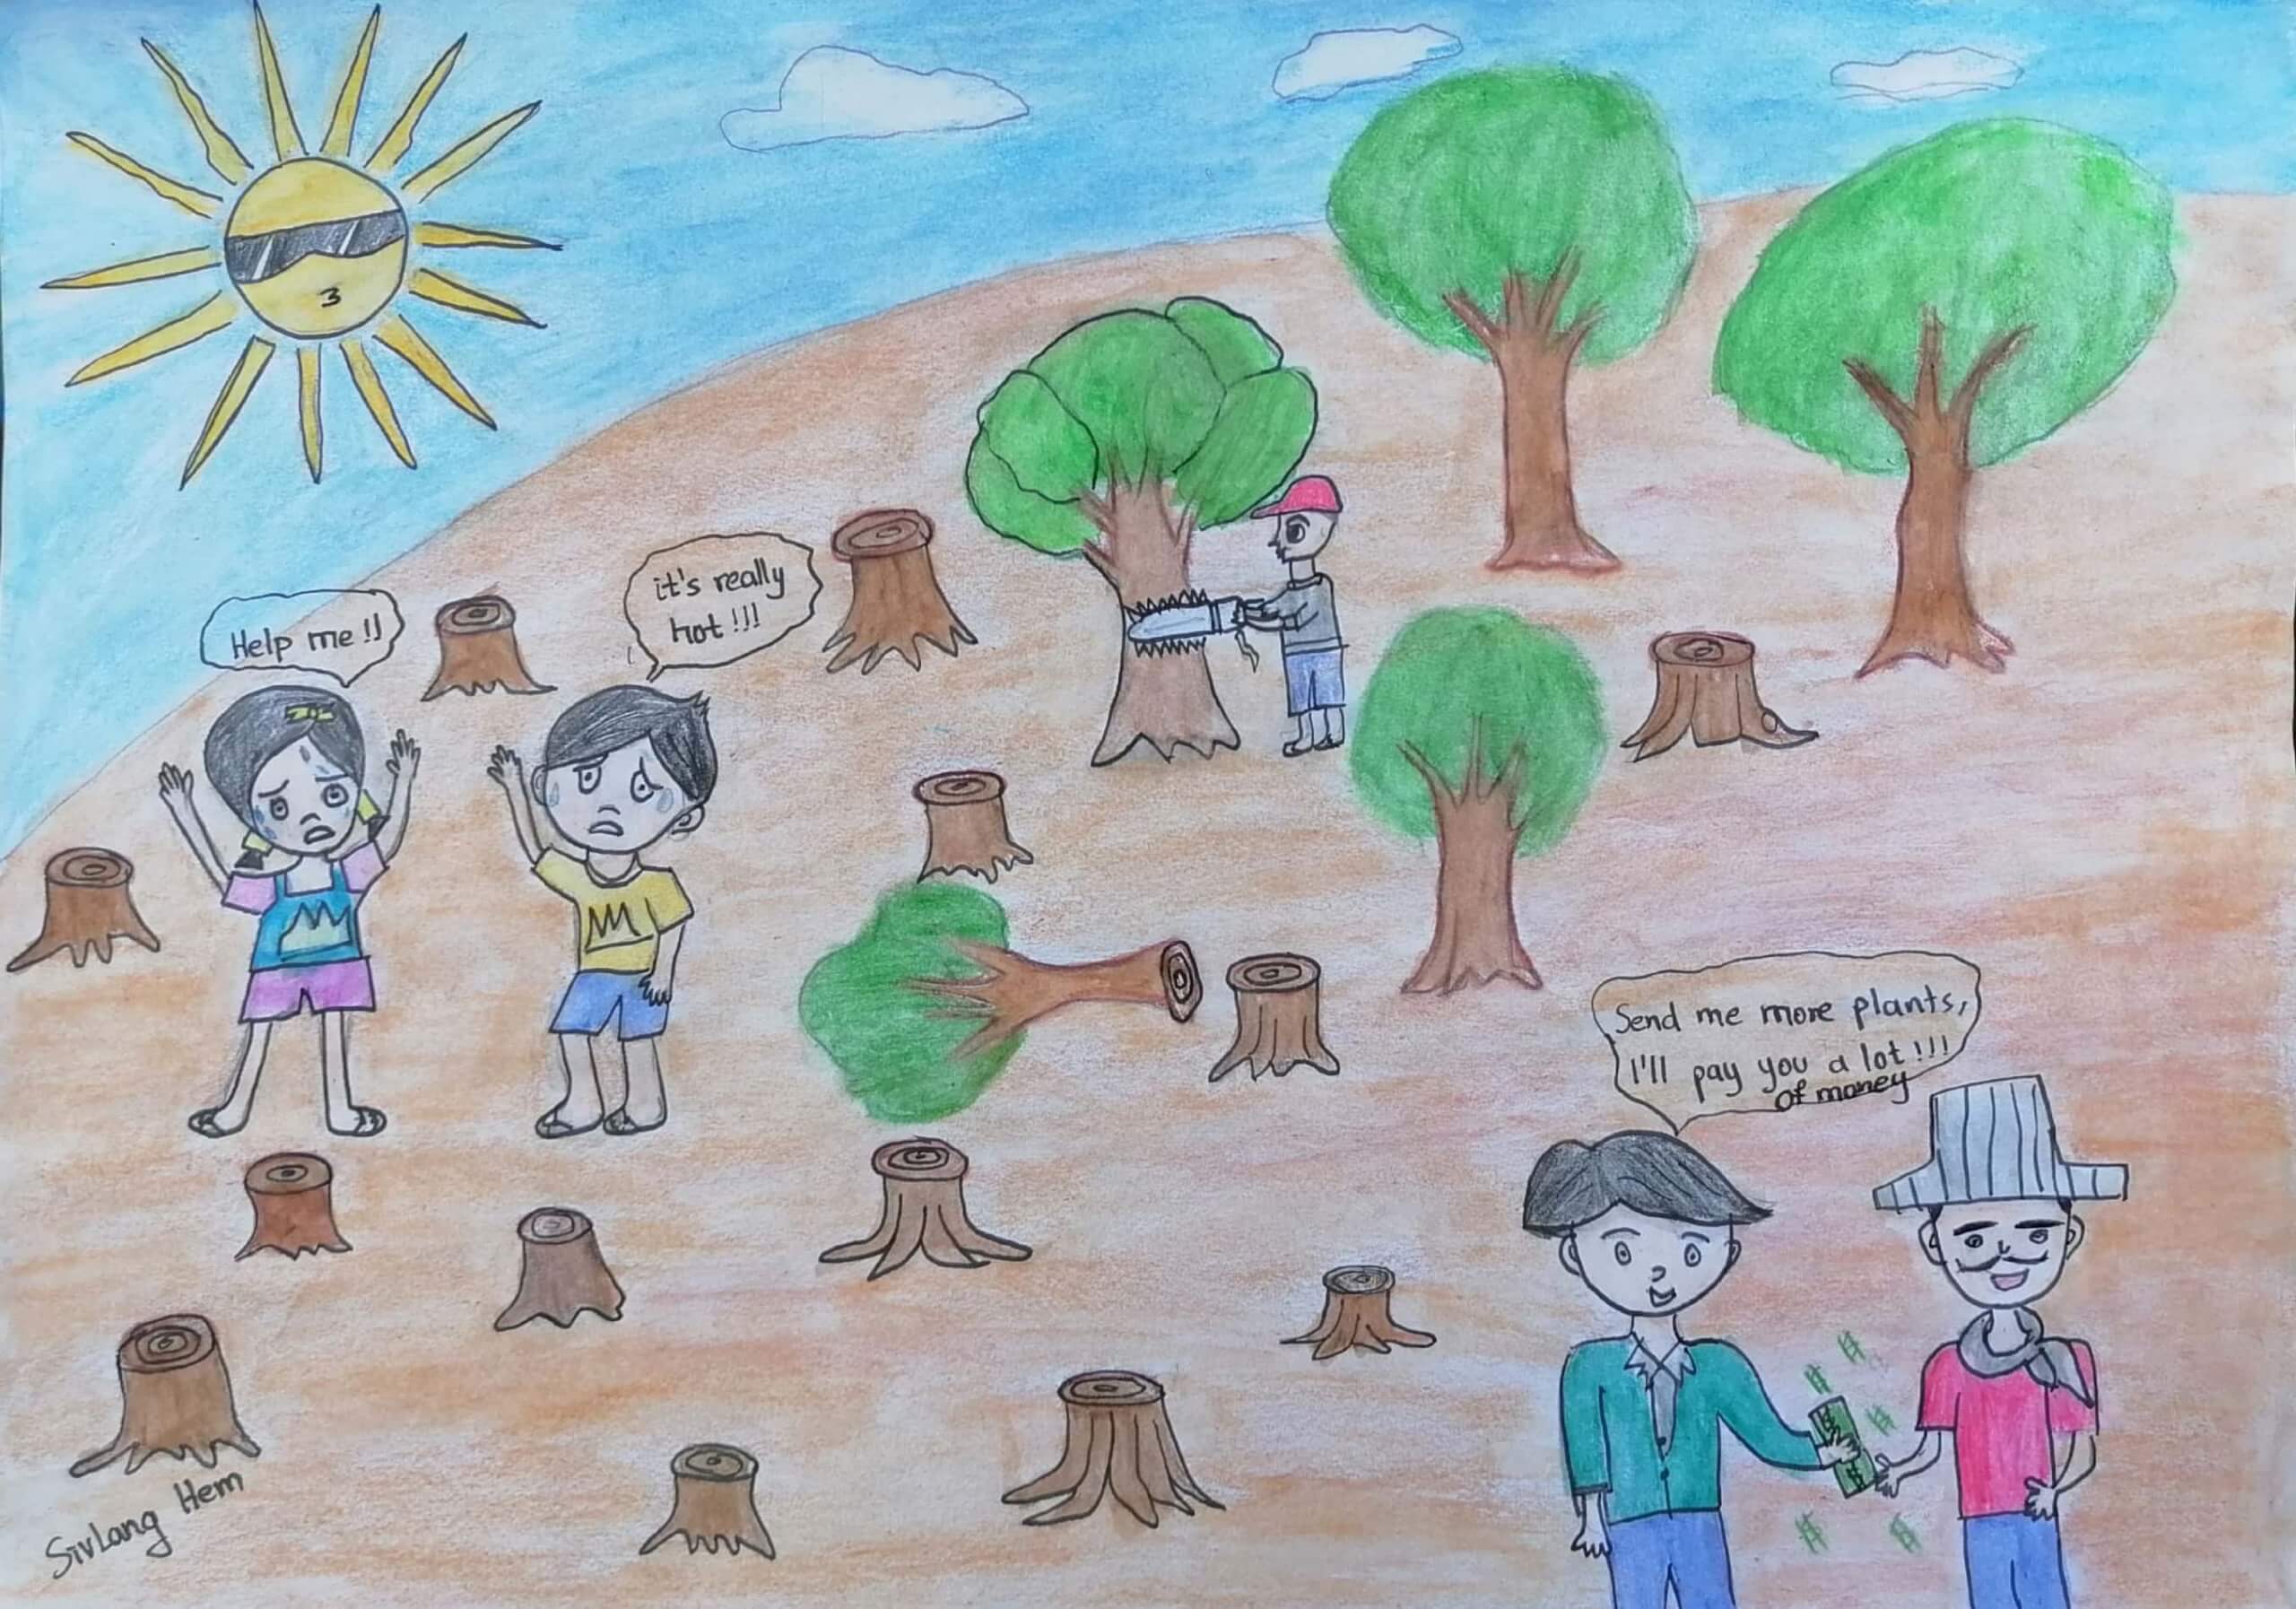 Draw a poster on effects of deforestation - Brainly.in